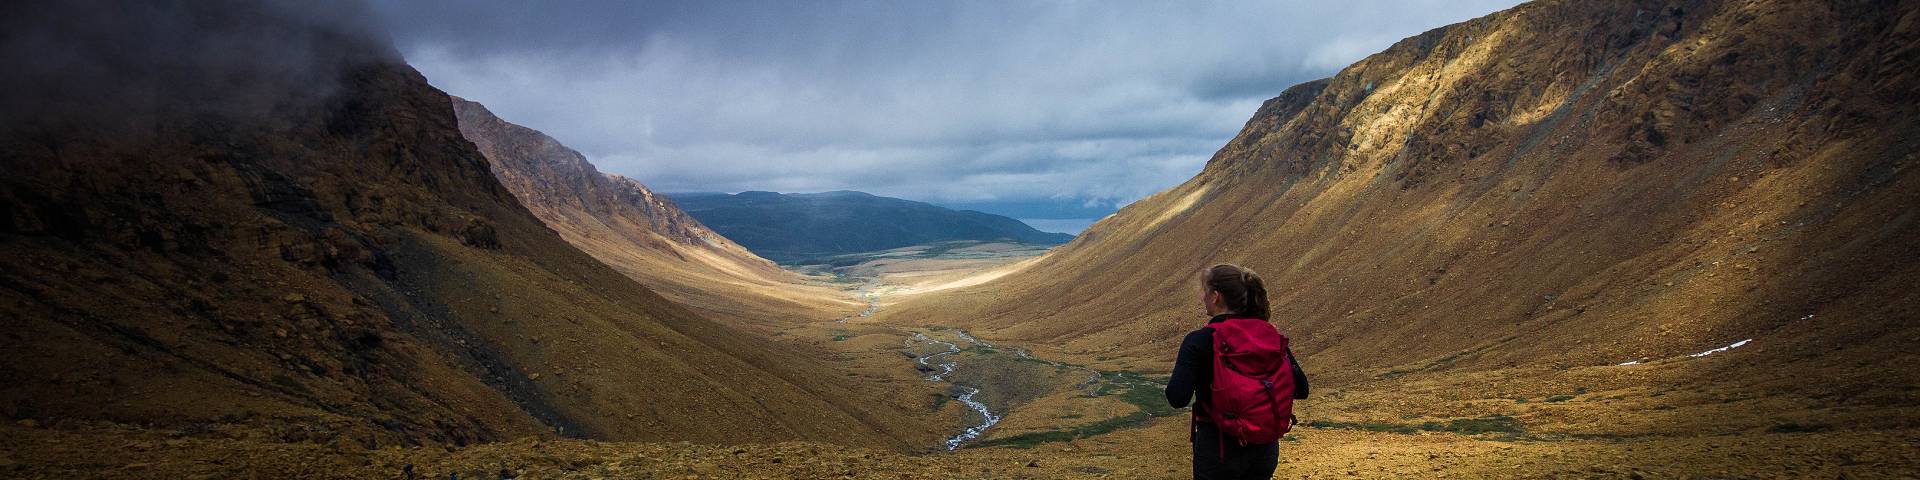 A hiker stands in a rocky valley in the Tablelands of Gros Morne National Park